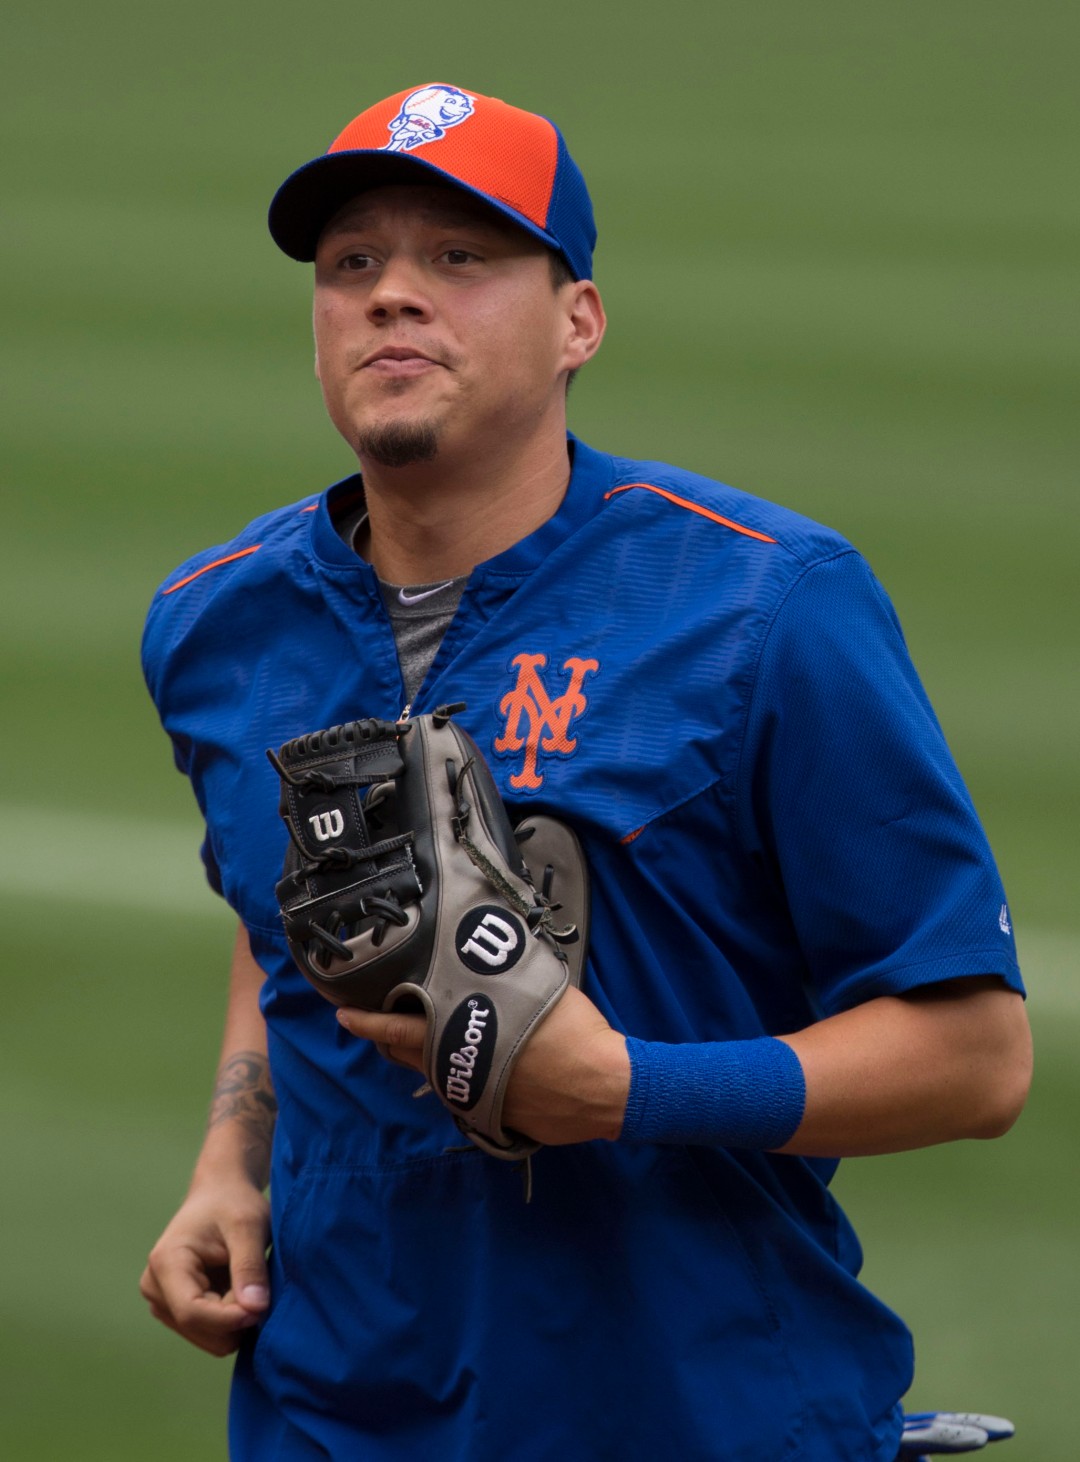 Slusser] Wilmer Flores is here, his first child - Wilmer - was born  Thursday in Miami. That makes five Wilmers in the immediate family. What  will they nickname the newest Wilmer? “Little